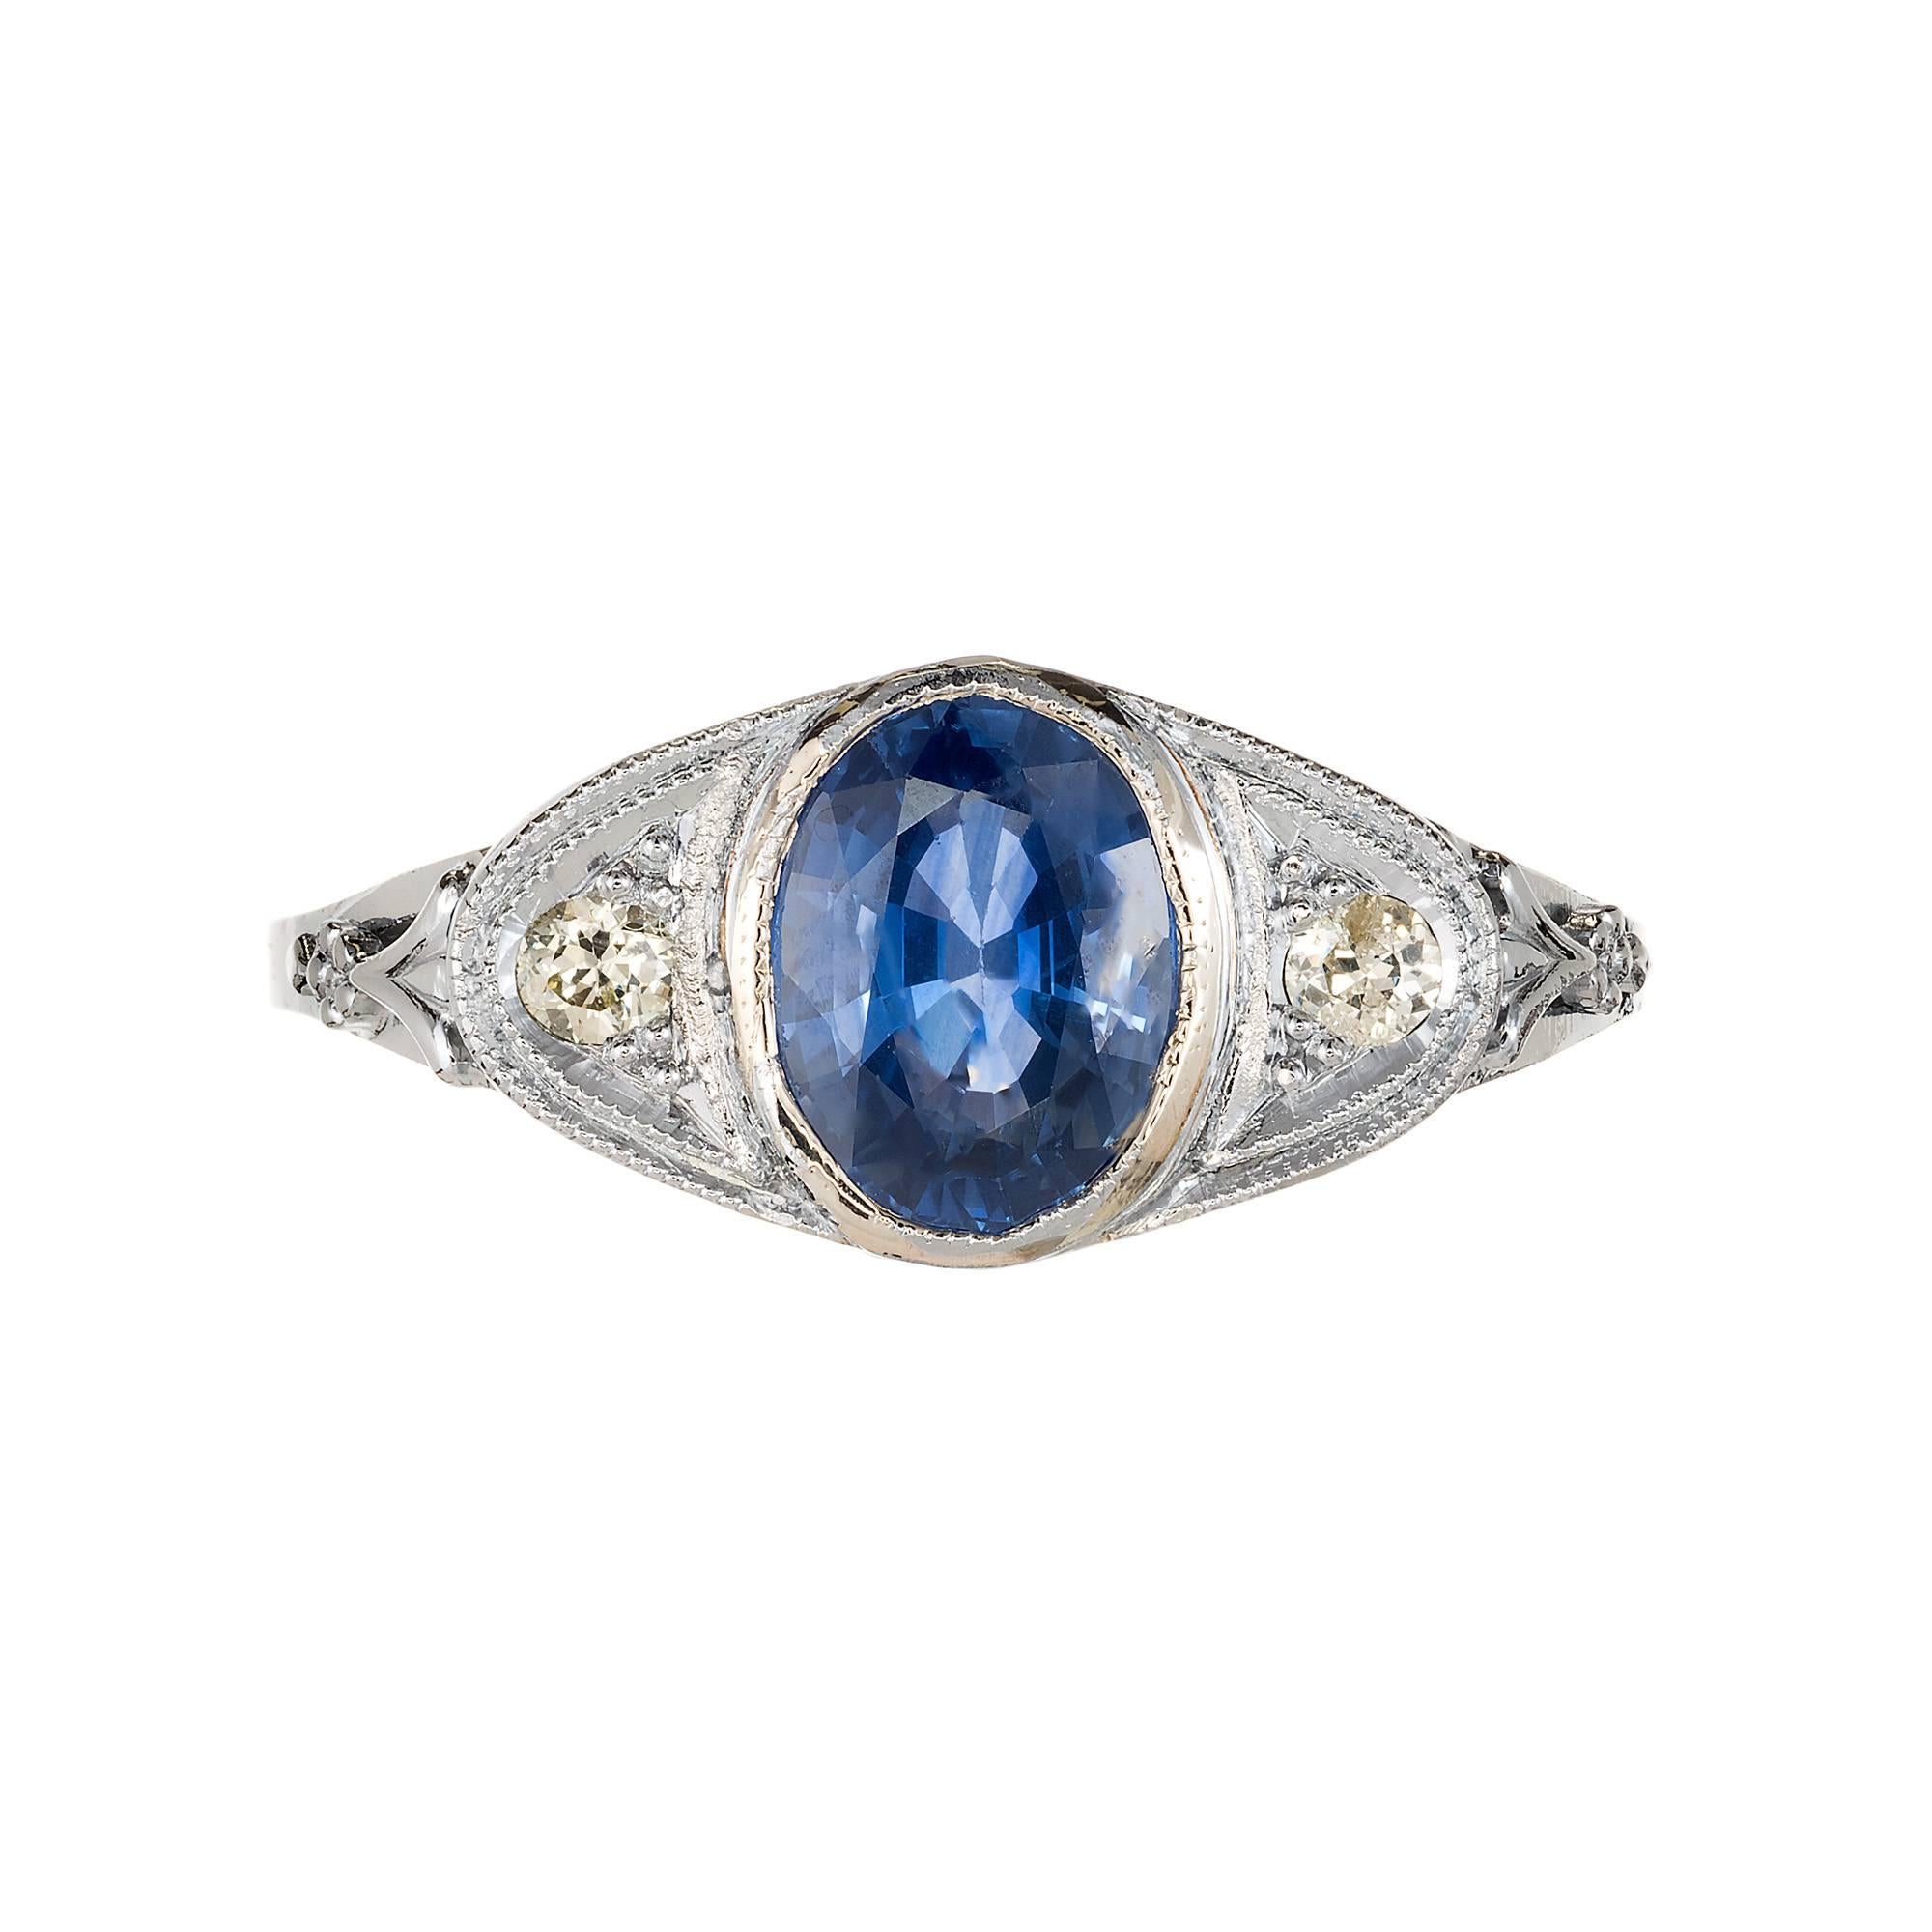 Old European Cut 1.50 Carat Oval Sapphire Diamond Hand Engraved Filigree Gold Engagement Ring